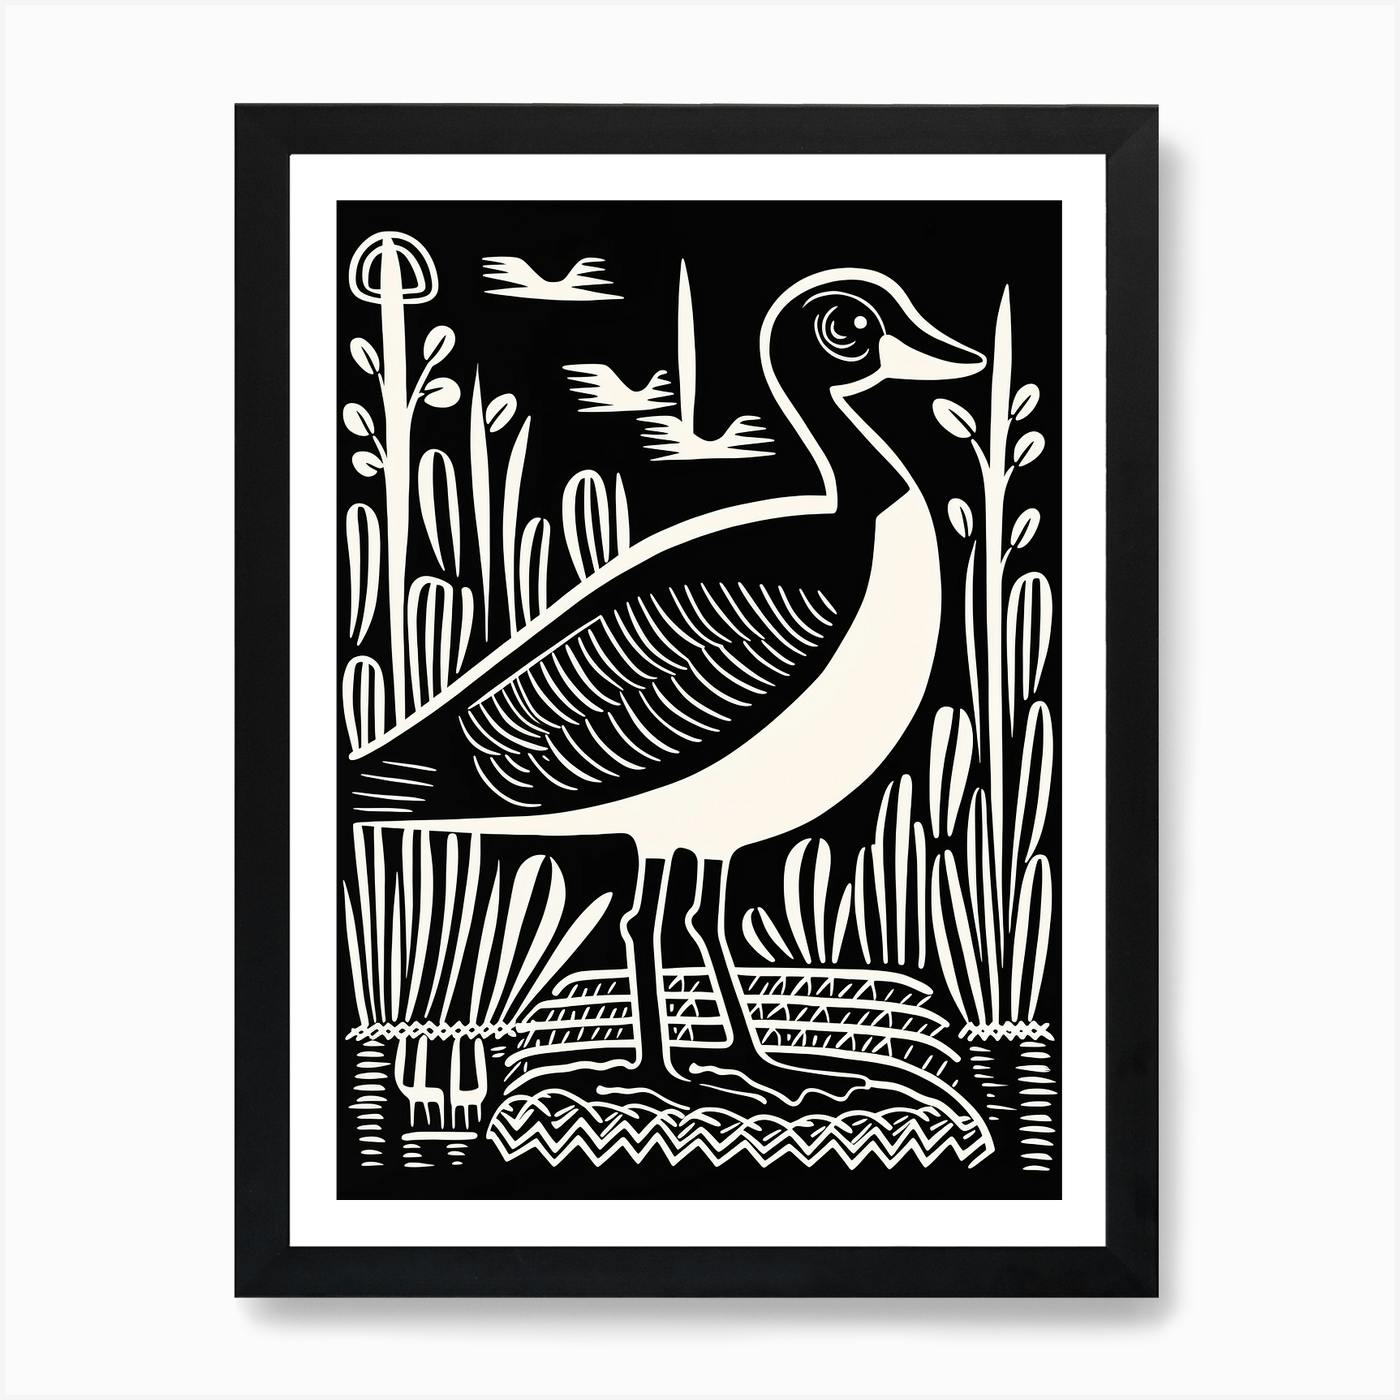 B&W Bird Linocut Goose 3 Art Print by Feathered Muse - Fy